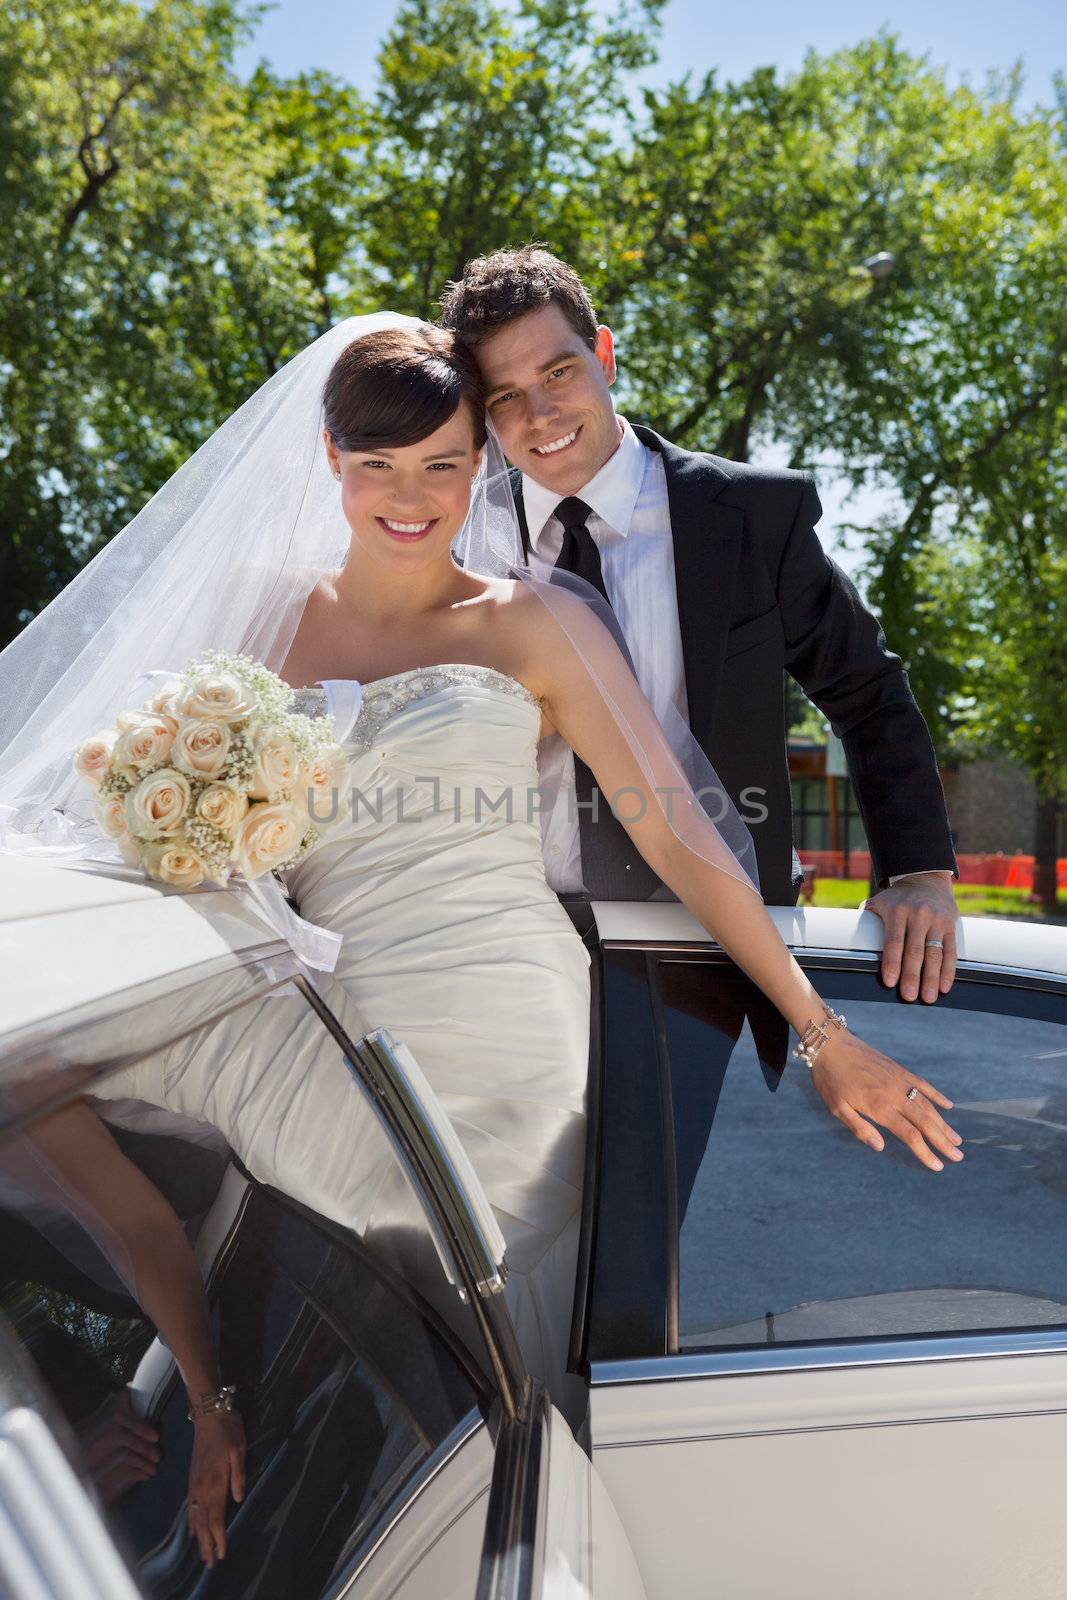 Wedding Couple Portrait with Limo by leaf